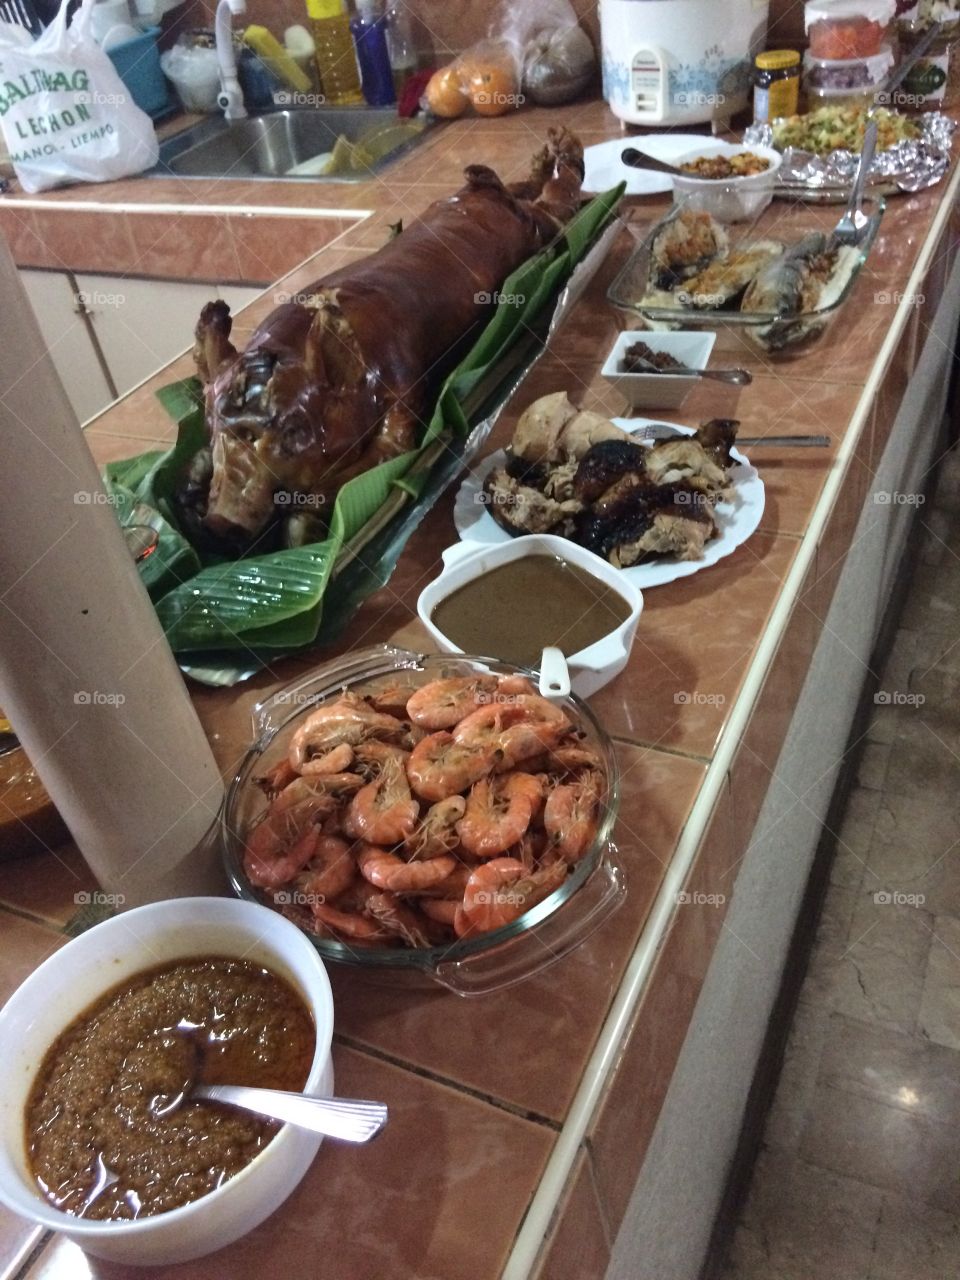 normally during celebrations food like steamed shrimp, fried chicken and roasted pig are served together with beer and wine.